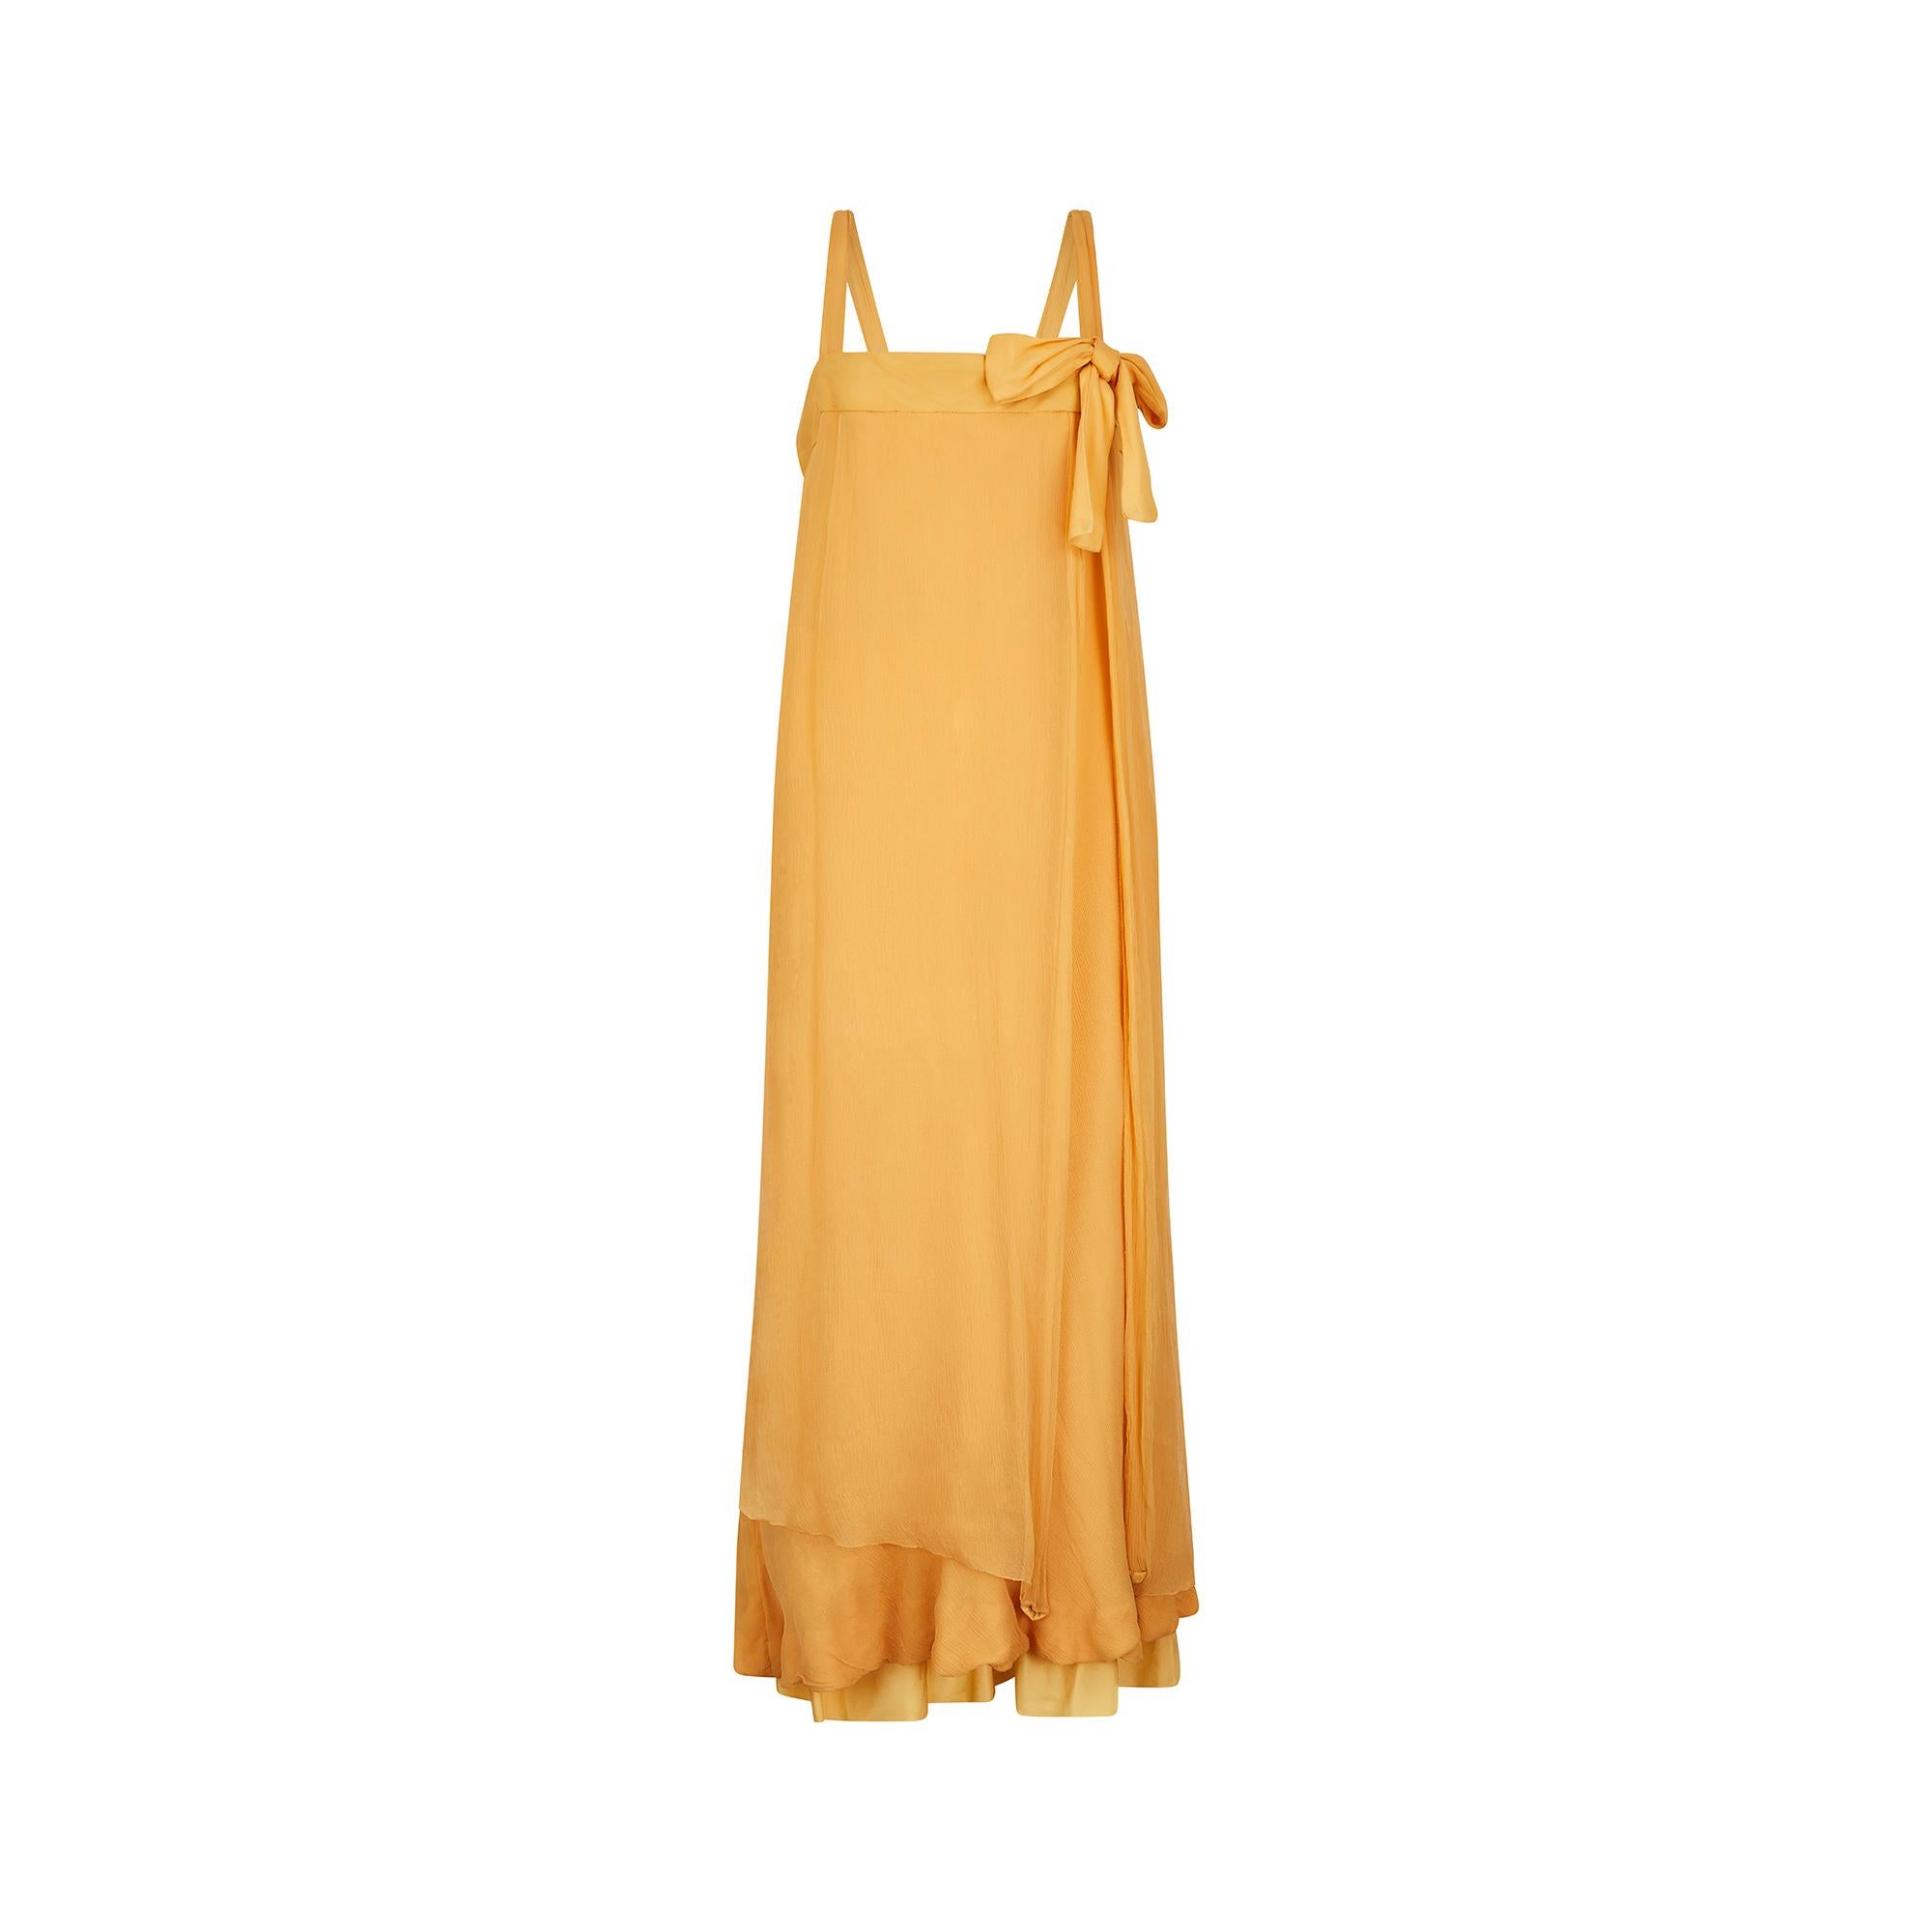 Outstanding haute couture chiffon column dress by Jacques Heim circa 1958 -1963.  A timeless billowy style and the perfect shade of sunshine yellow. Featuring a bow detail to both the front and back, the dress hangs loosely all the way down -